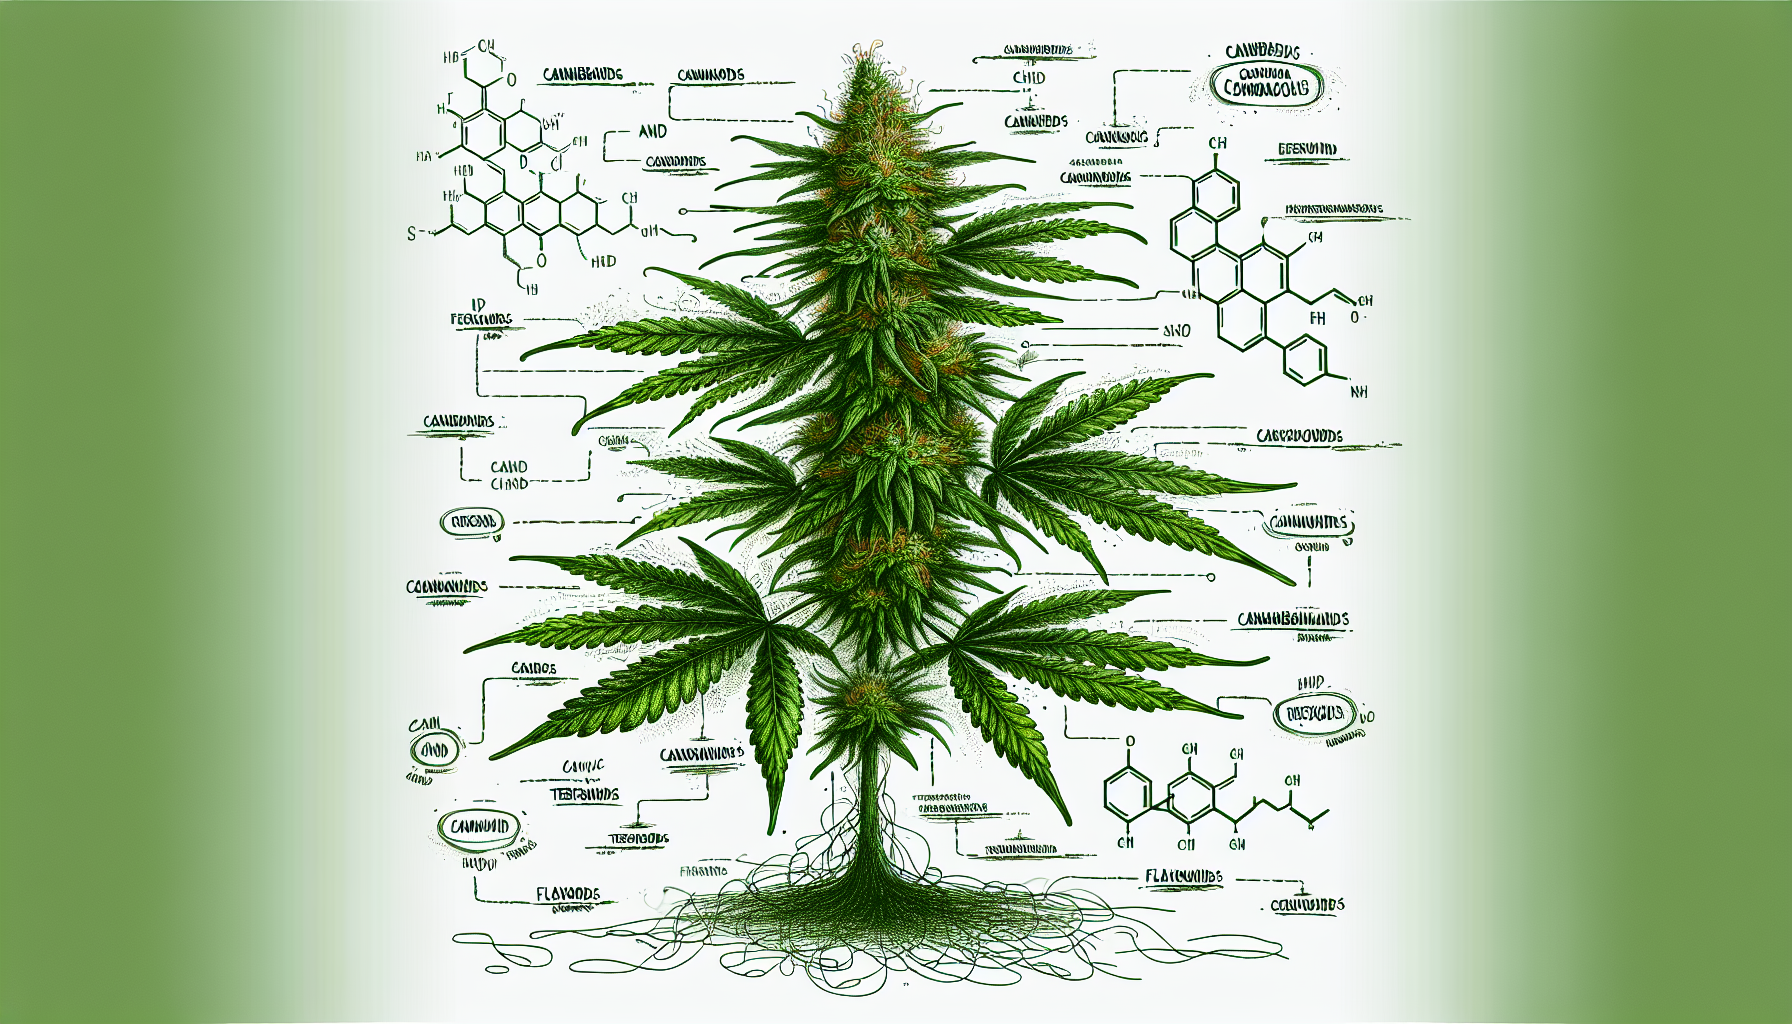 Illustration of cannabis plant with various compounds